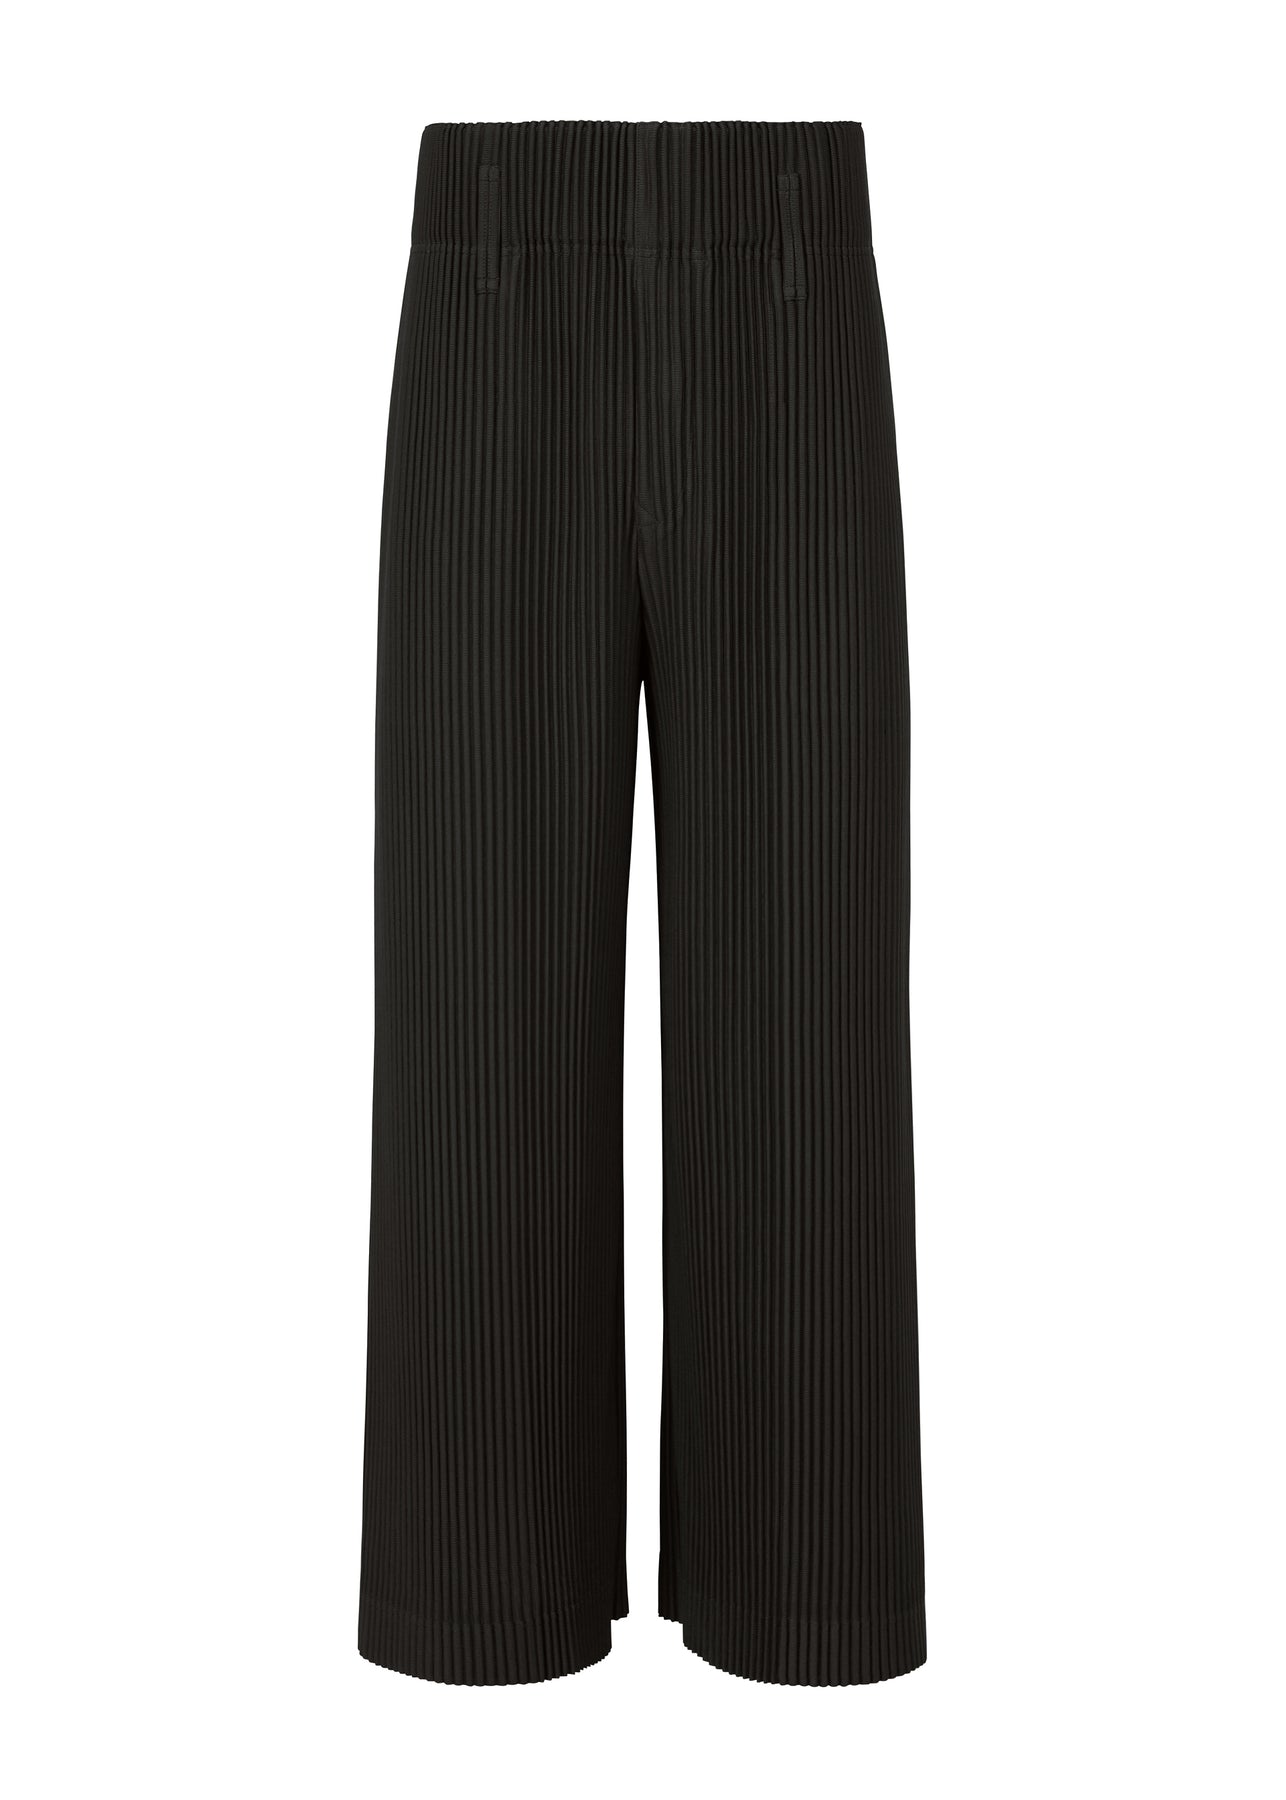 PLEATS BOTTOMS 2 PANTS | The official ISSEY MIYAKE ONLINE STORE 